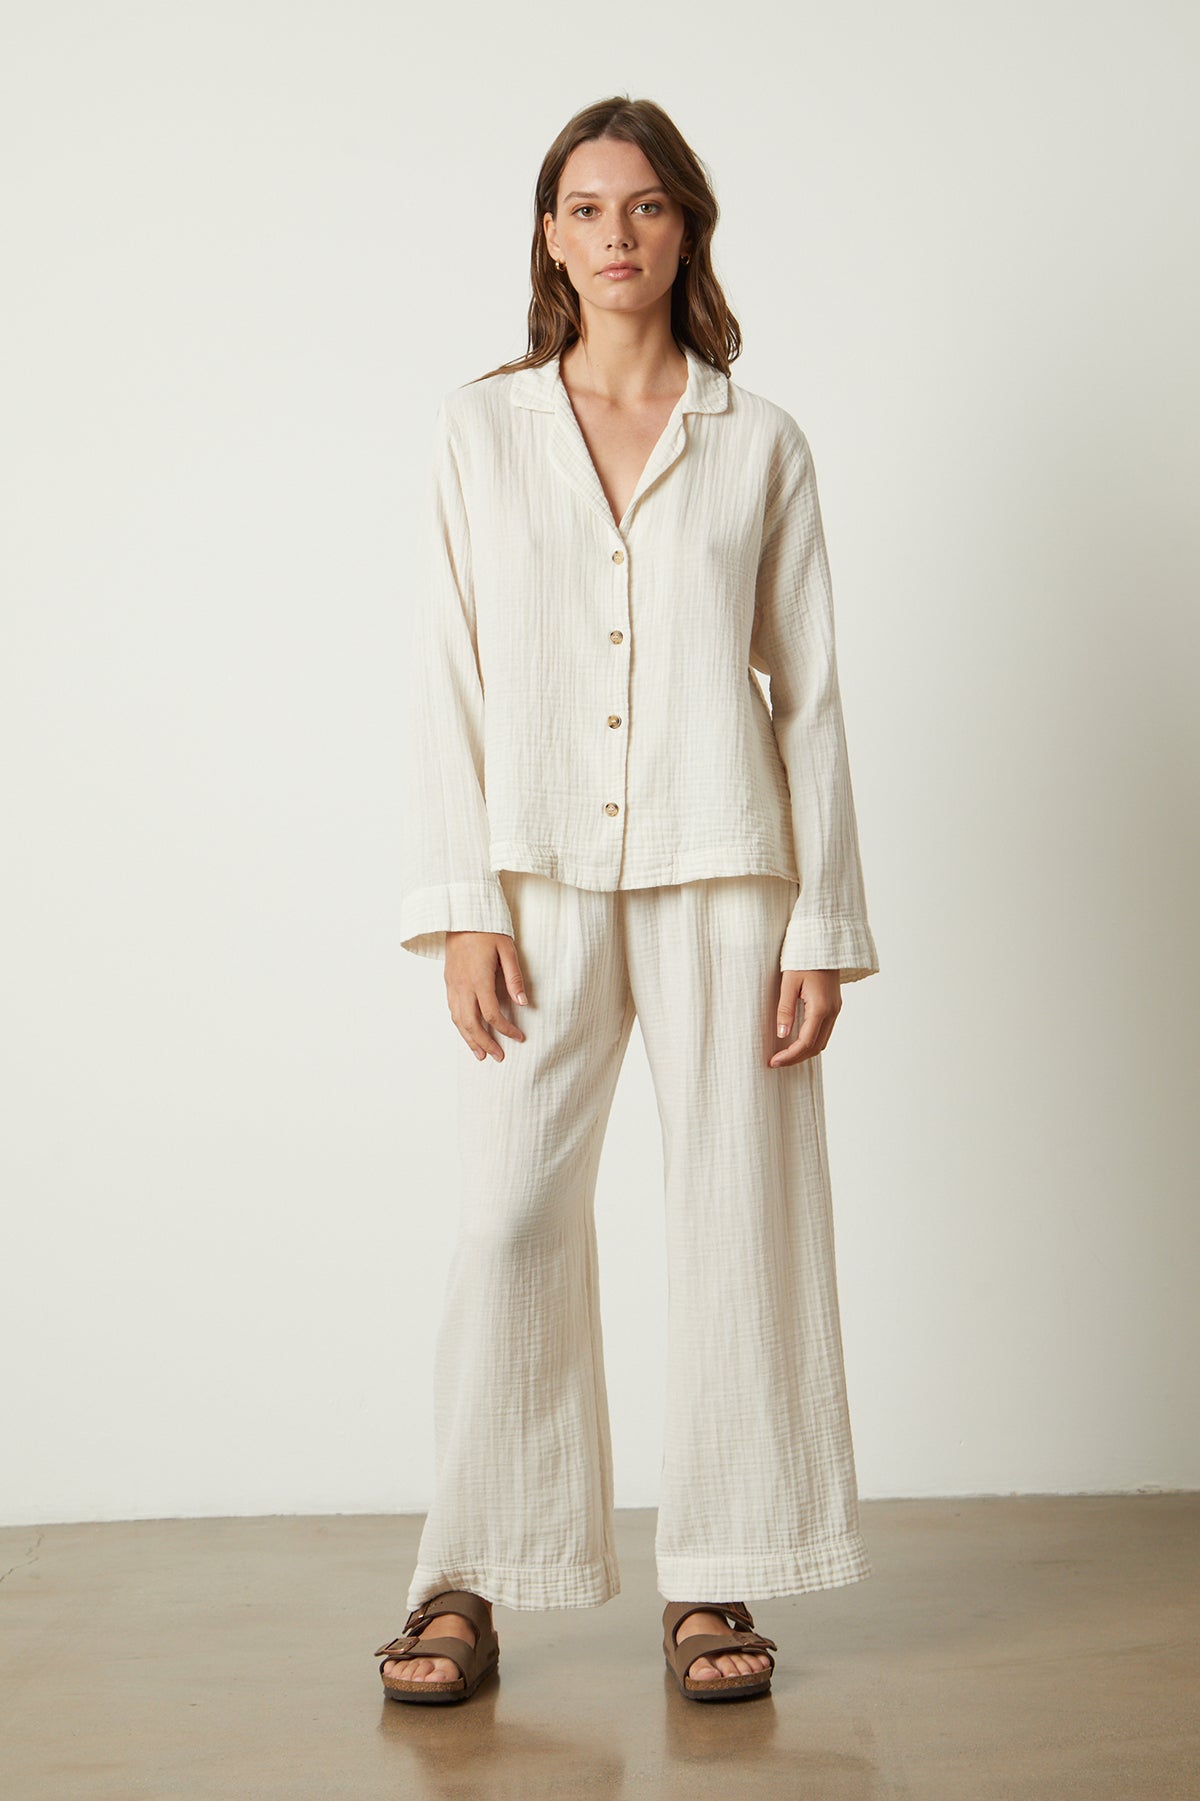 The model is wearing a white linen pajama shirt from Jenny Graham Home.-25519547908289